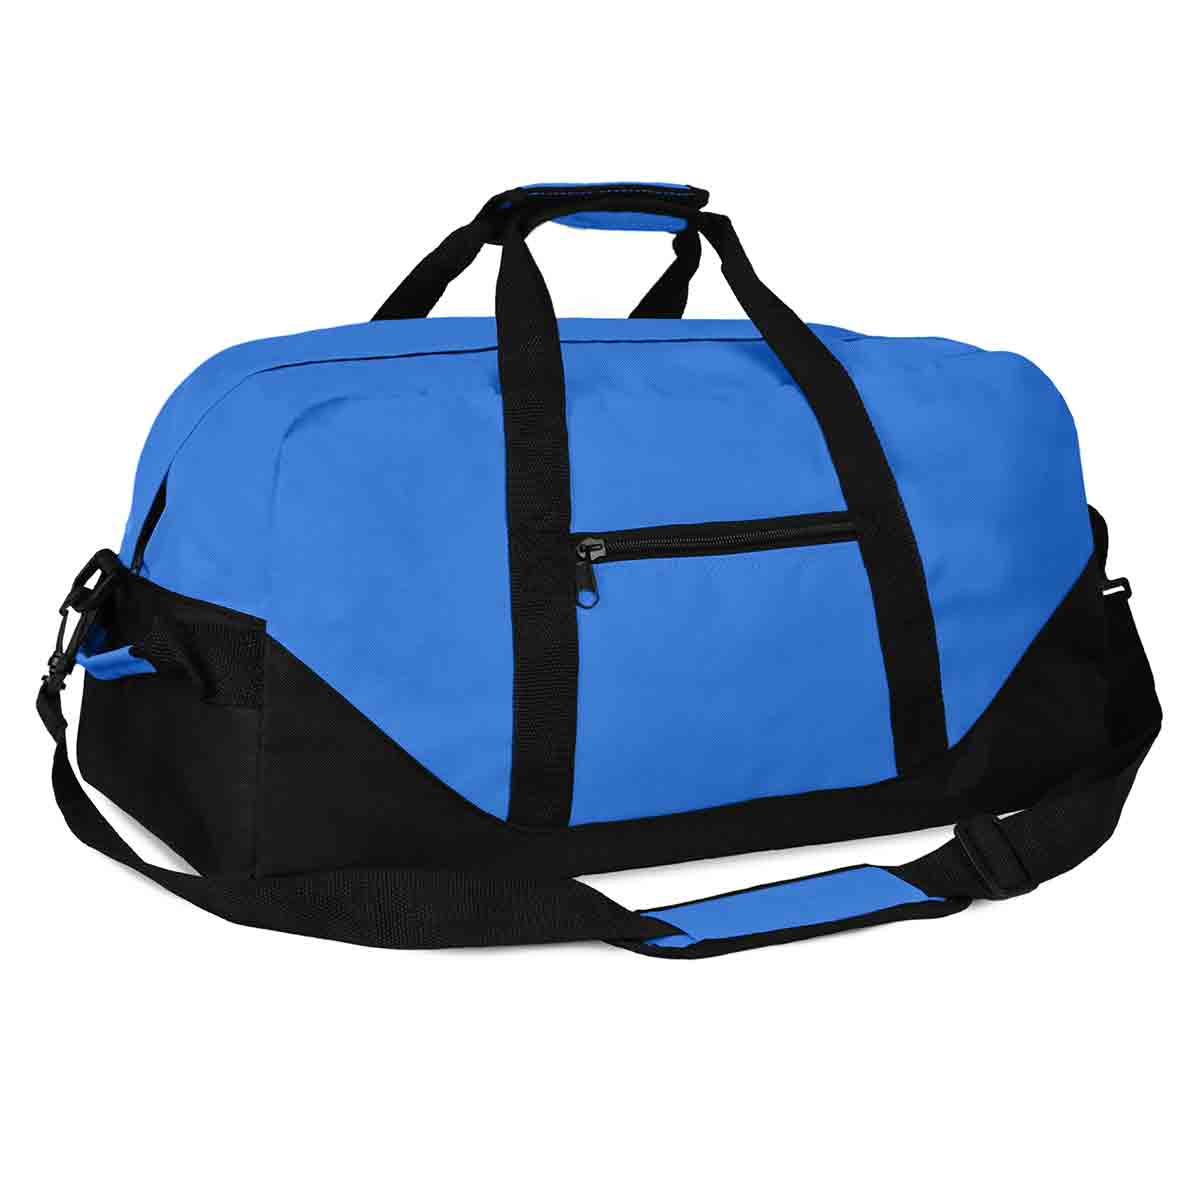 Dalix 21" Large Duffel Bag with Adjustable Strap